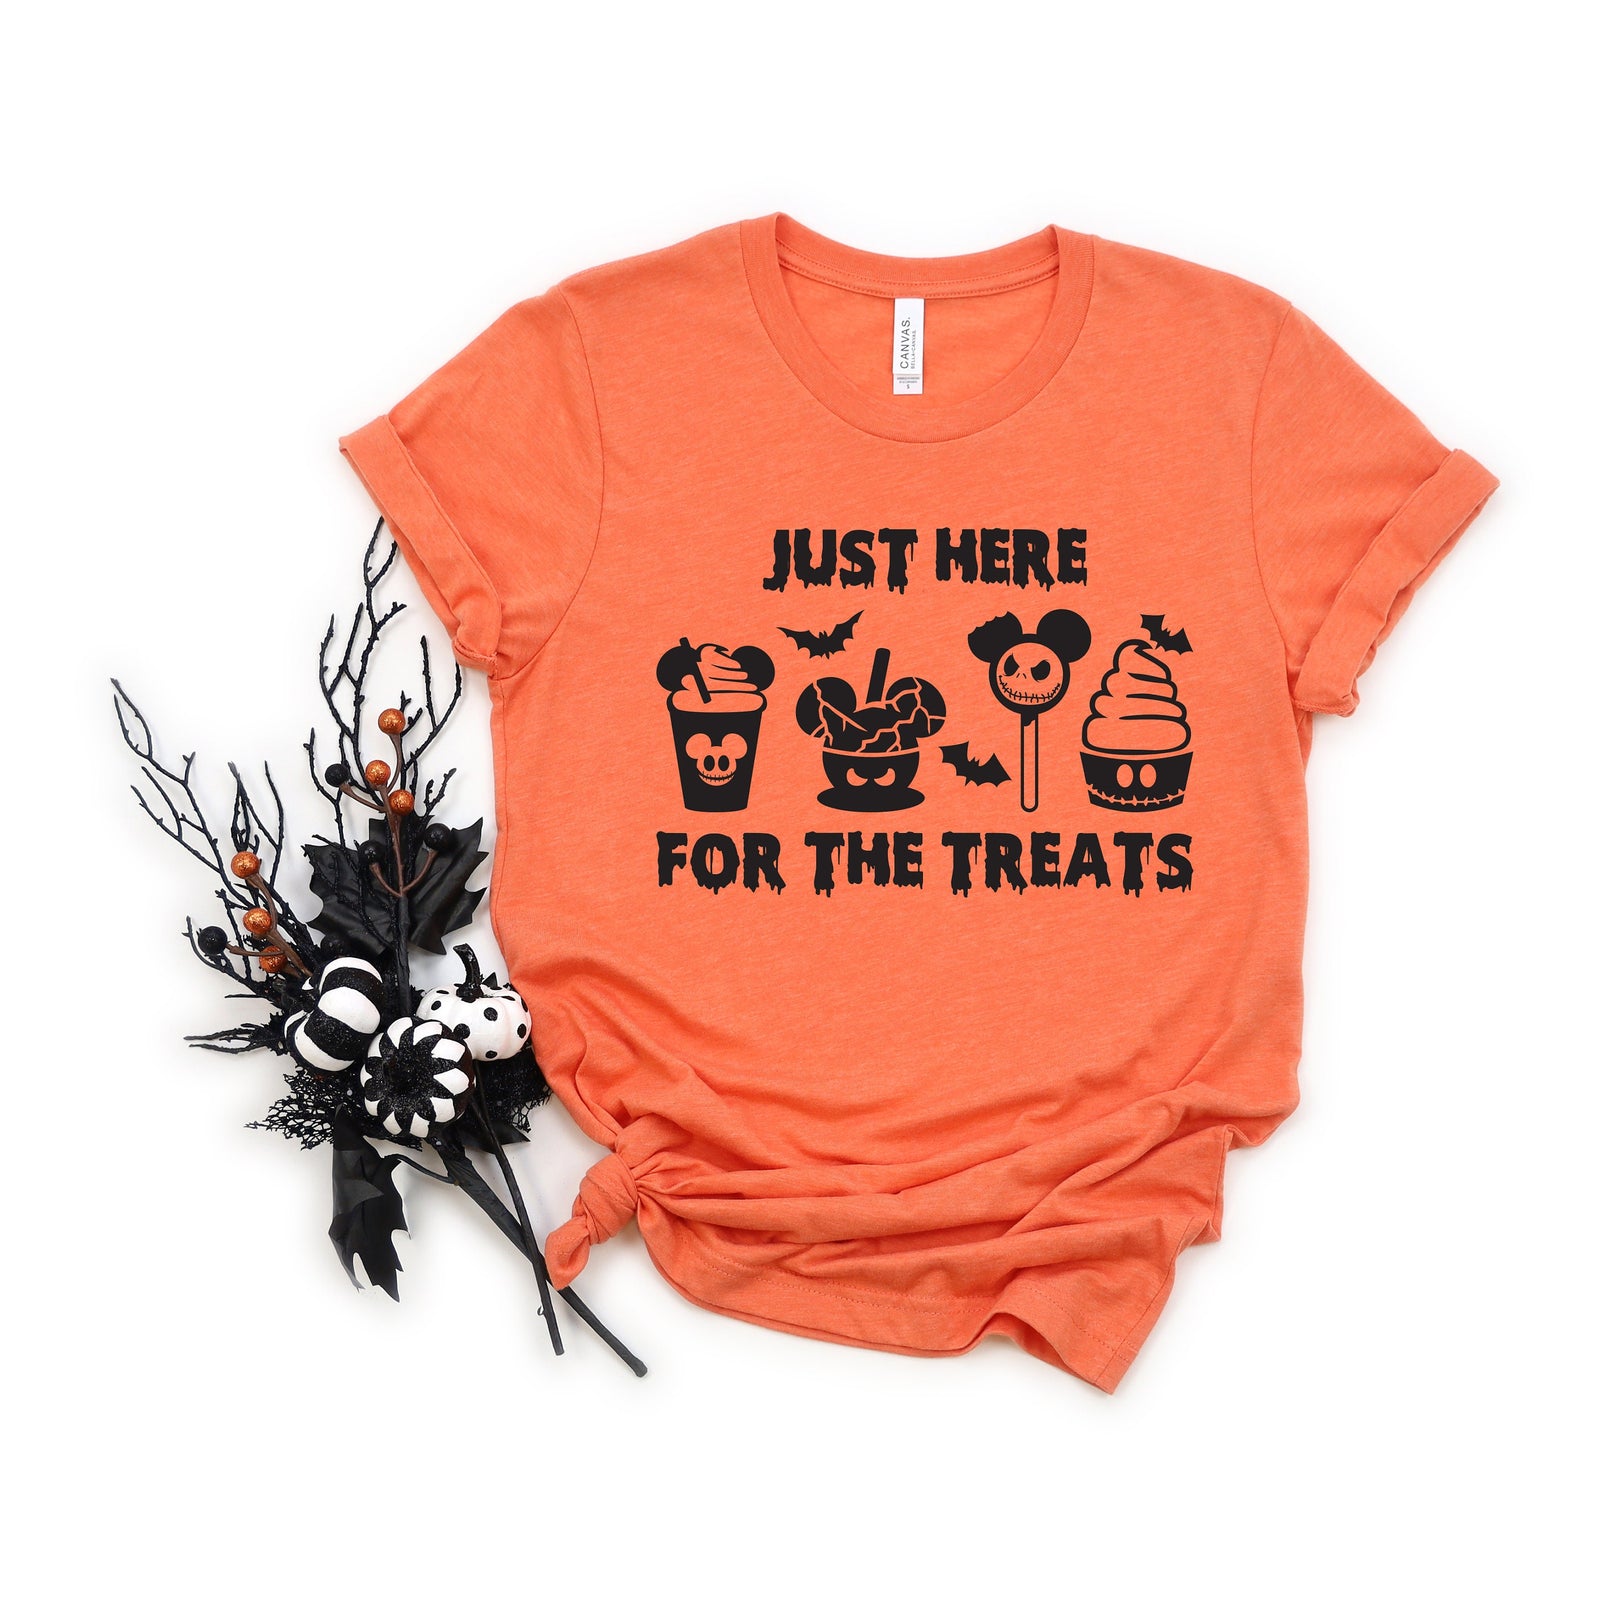 Just Here for the Treats - Disney Snacks Adult T Shirt - Halloween - Not So Scary - Matching Shirts